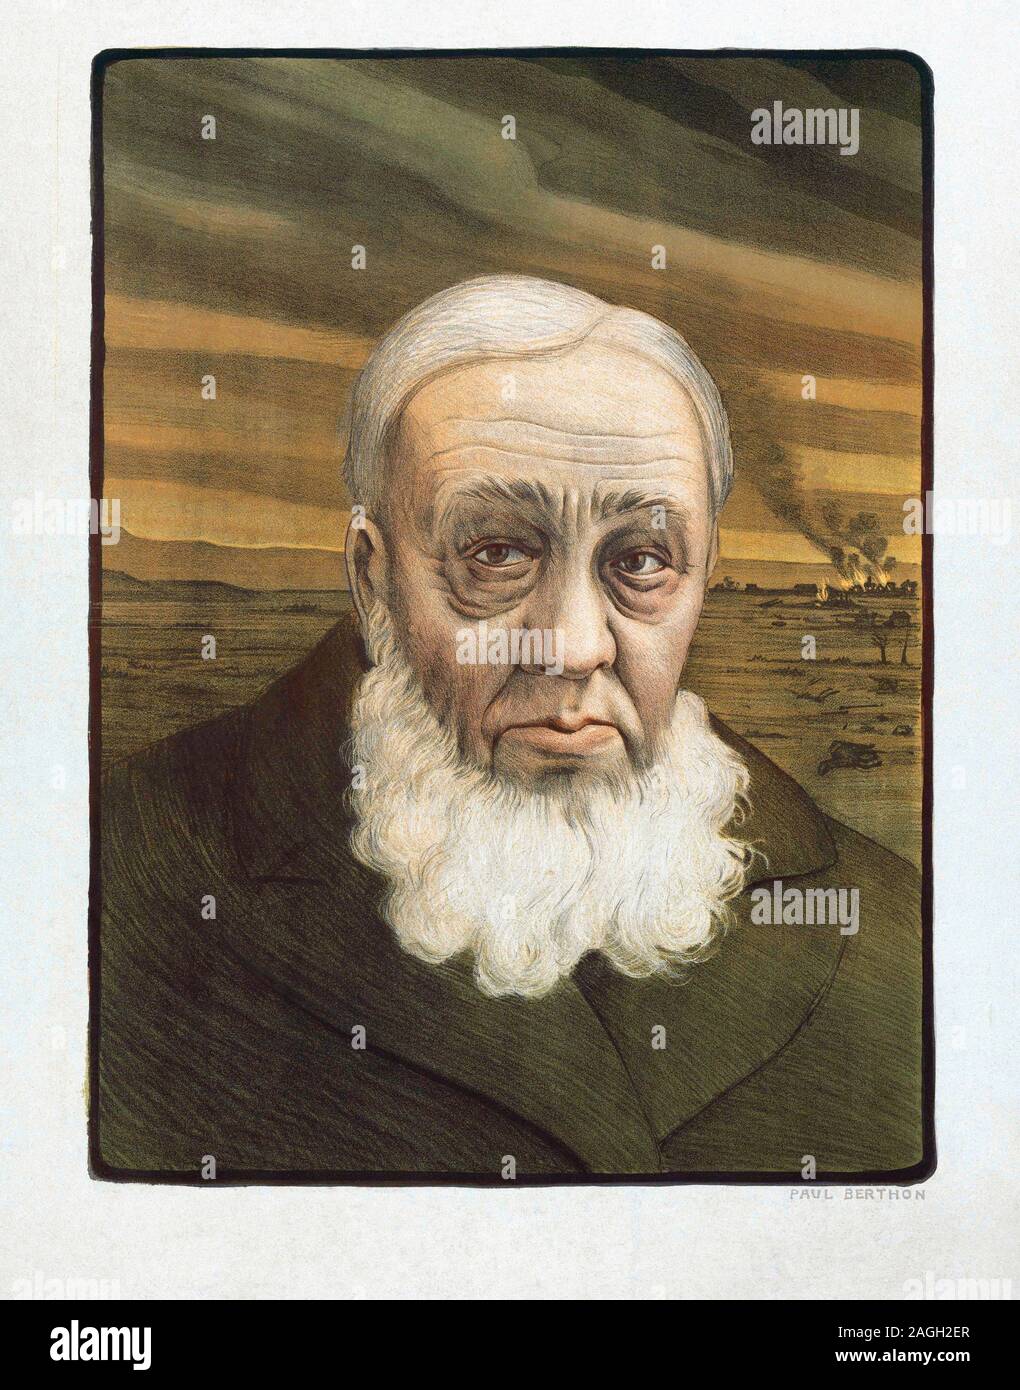 Paul Kruger, 1825 – 1904.  Fullname, Stephanus Johannes Paulus Kruger, 1825 – 1904.  3rd President of the South African Republic.  After a print by French artist Paul Berthon, 1872 - 1934. Stock Photo